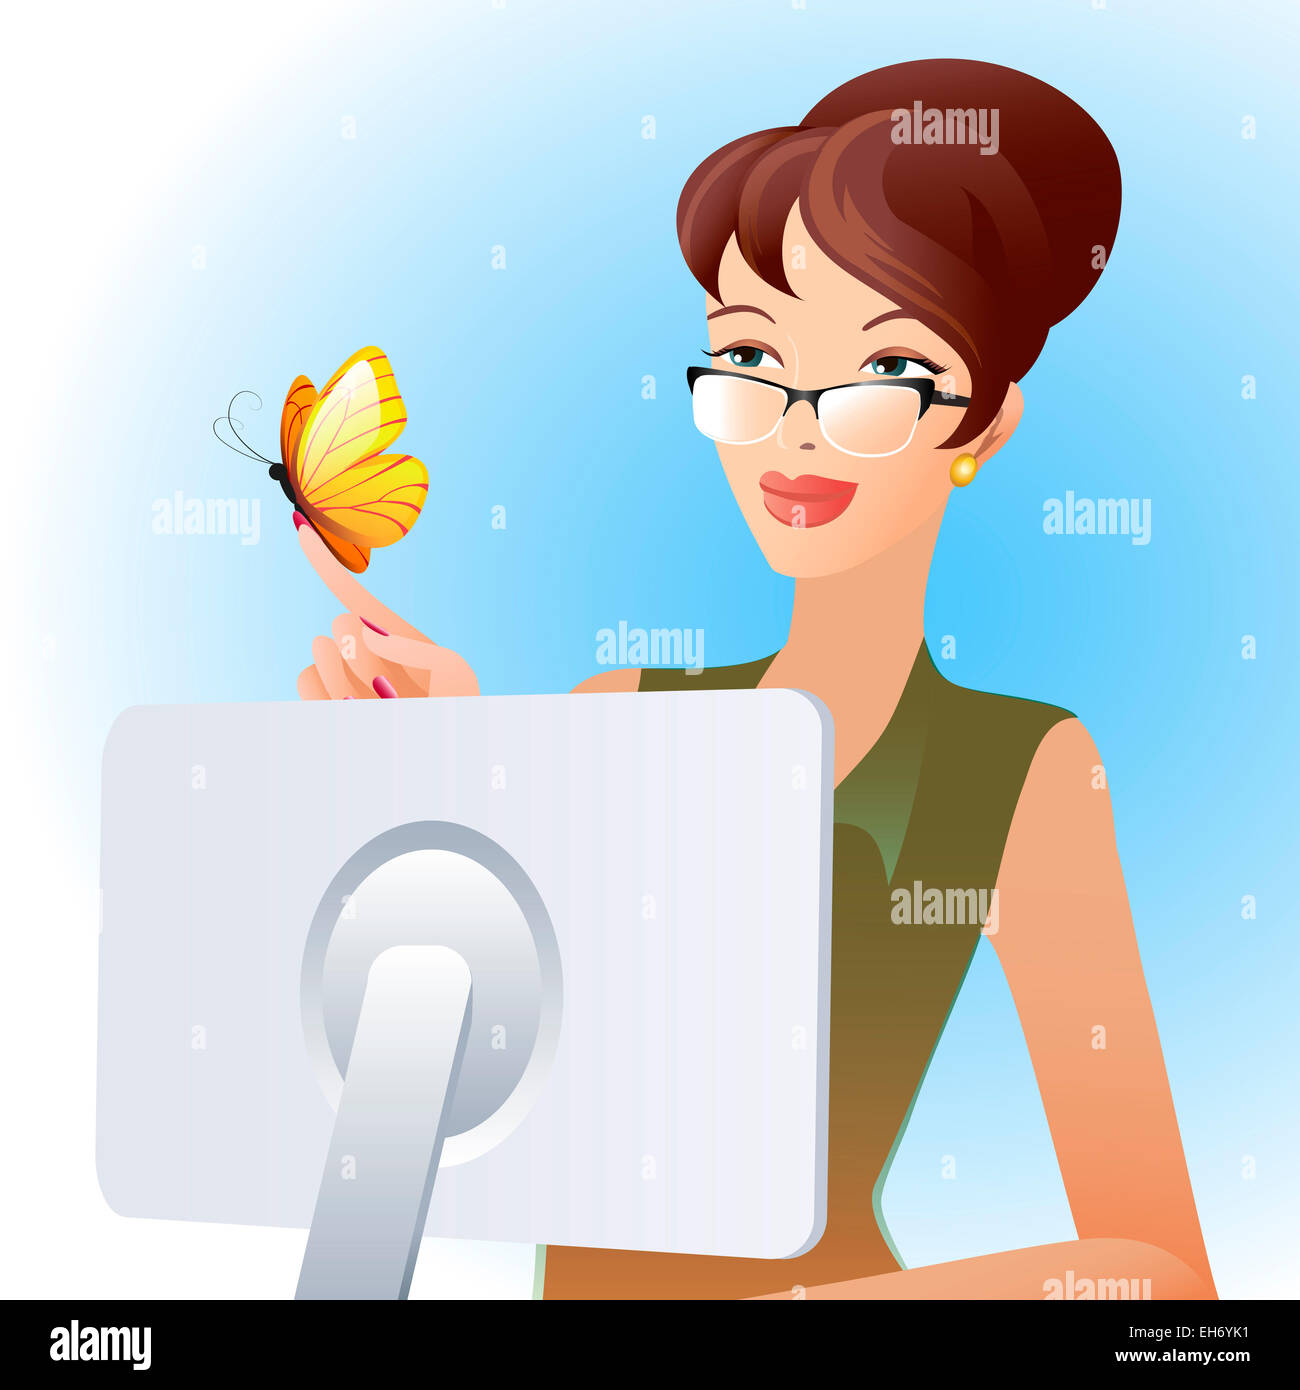 Illustration of secretary woman looking at butterfly on her finger Stock Photo